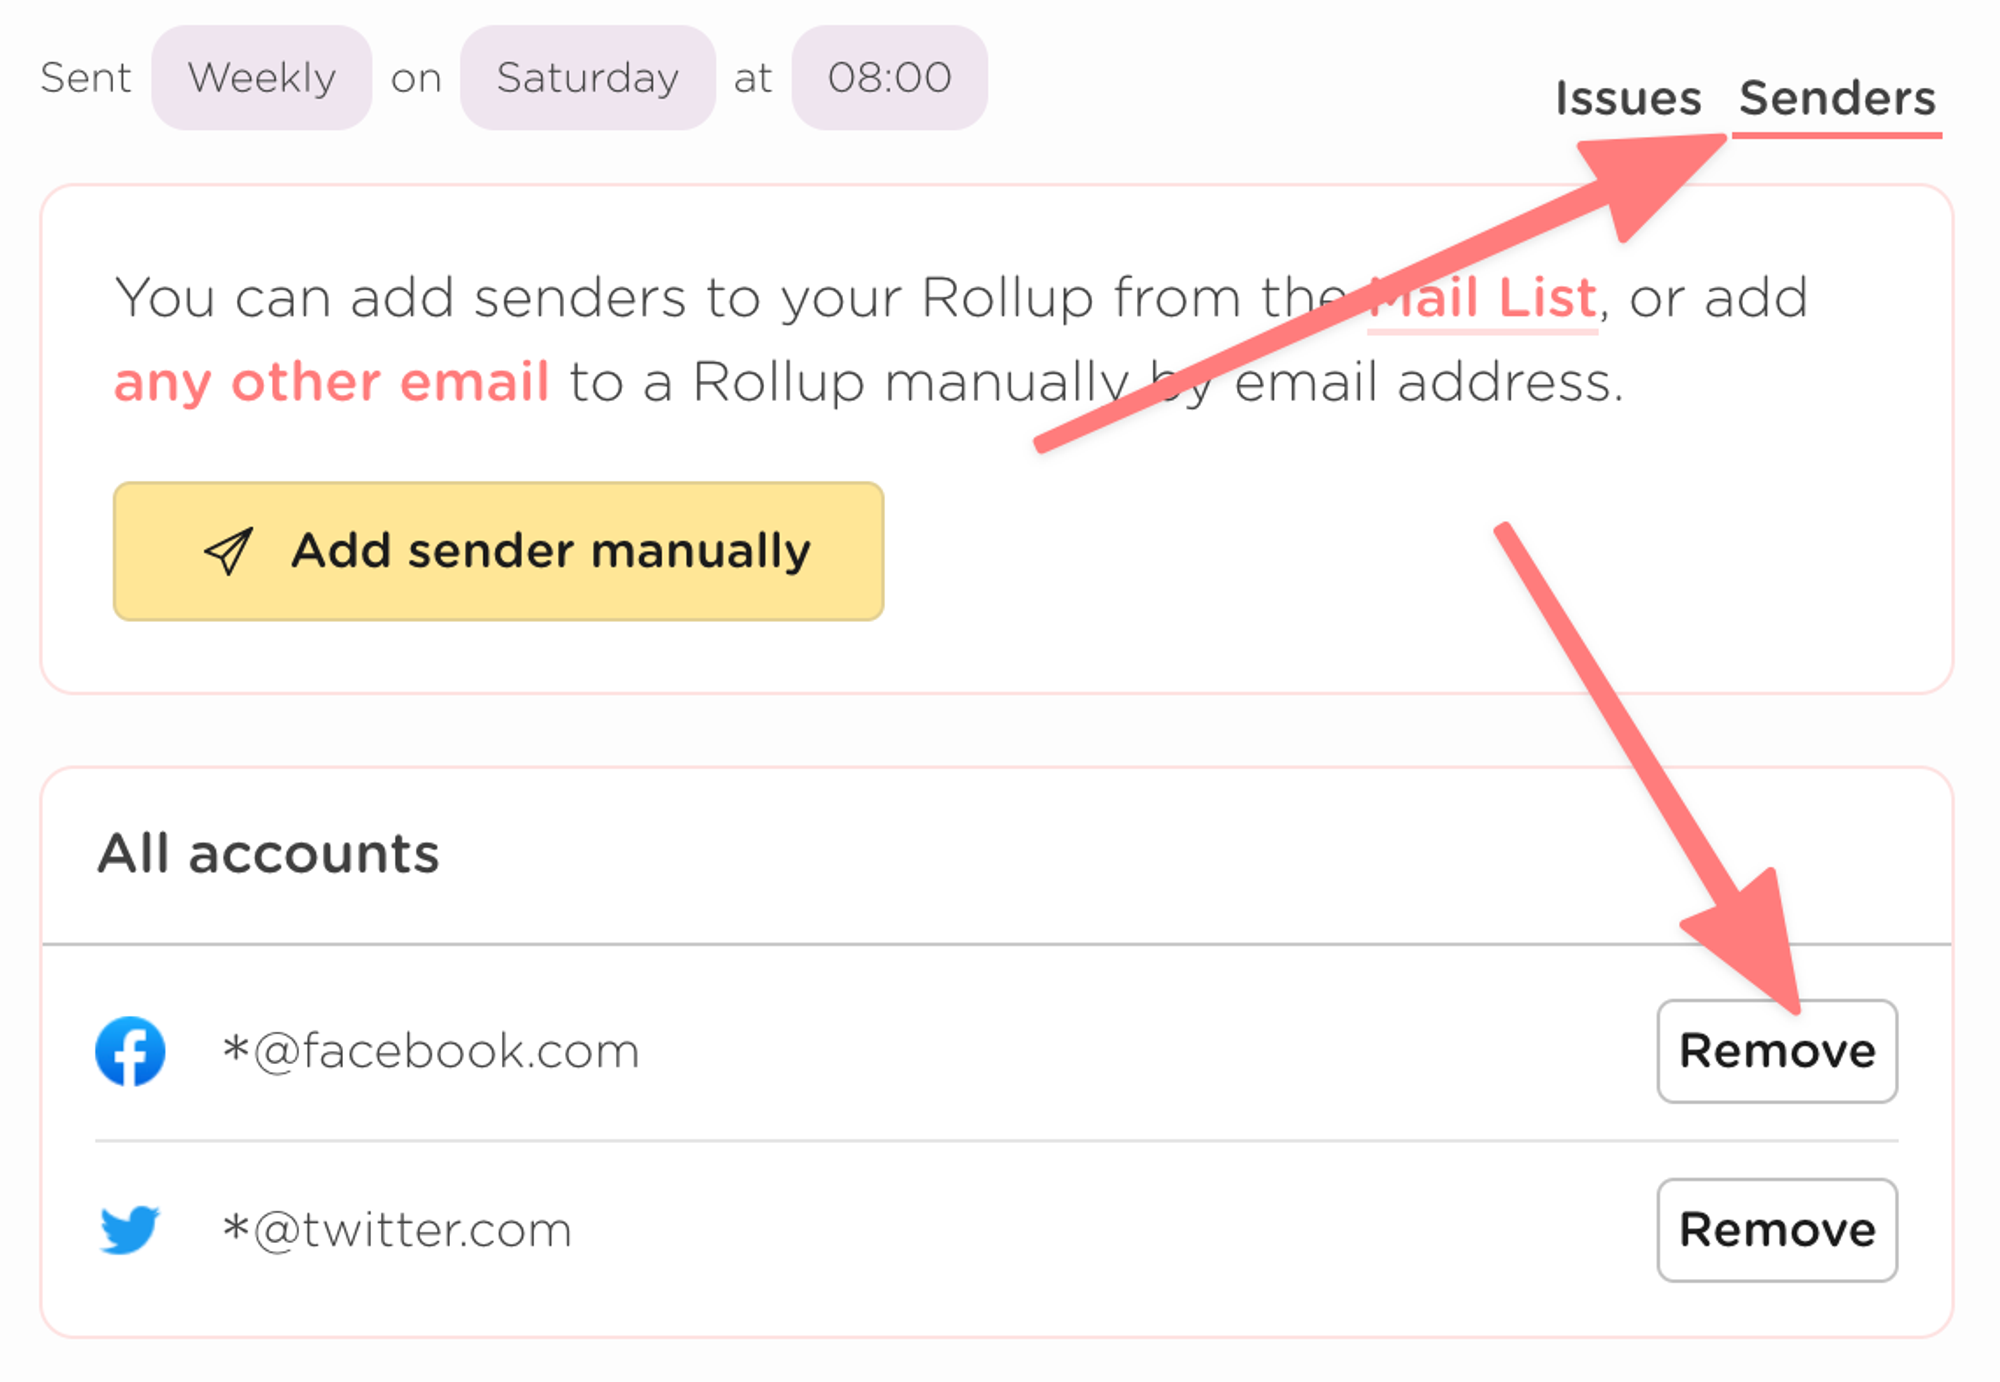 Navigate to the senders list and click "Remove"